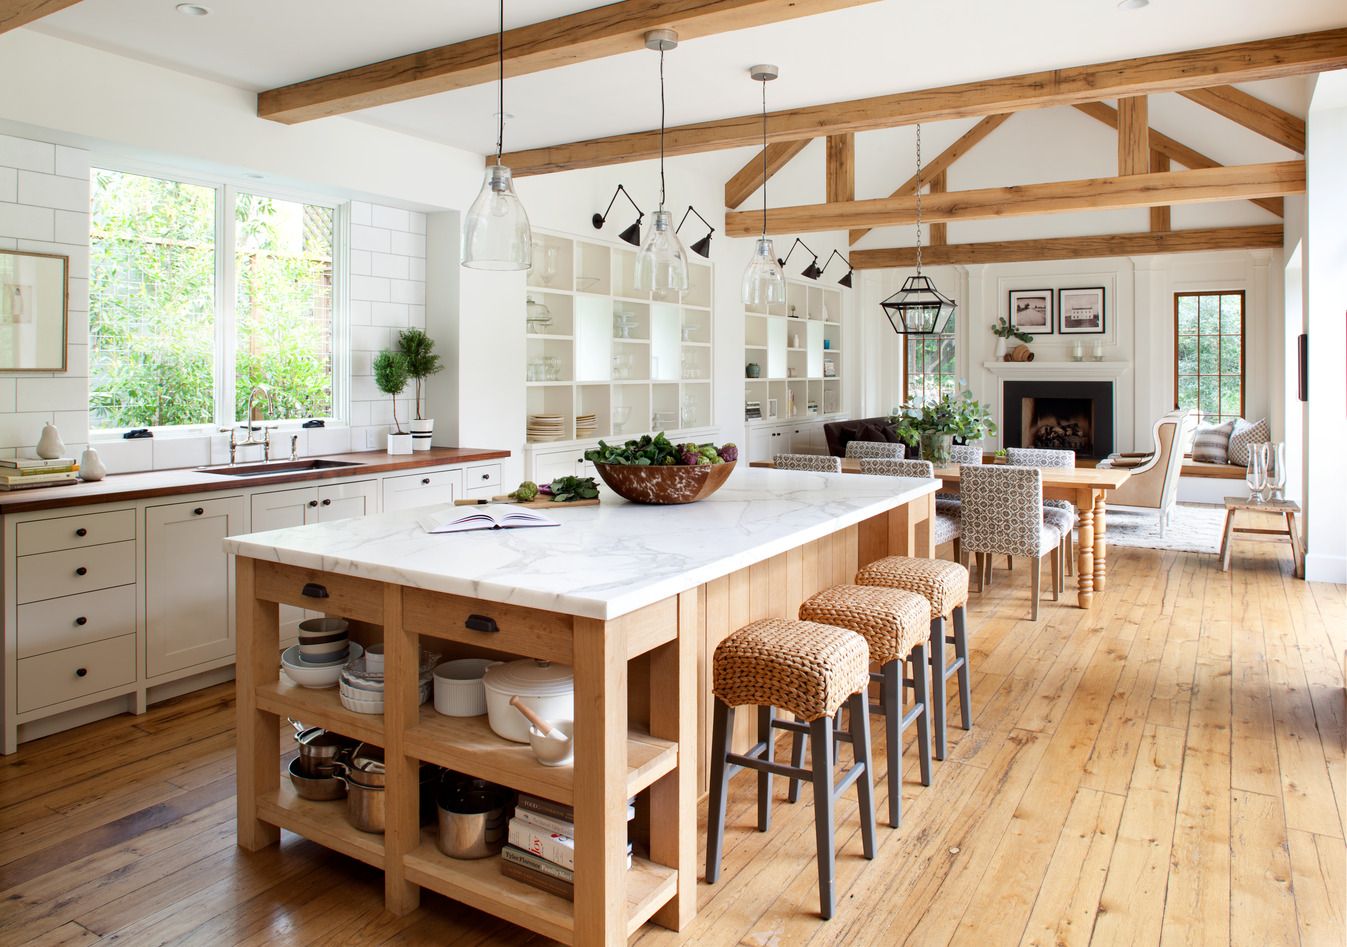 10 Modern Open Kitchen Ideas That Maximize Flow and Function